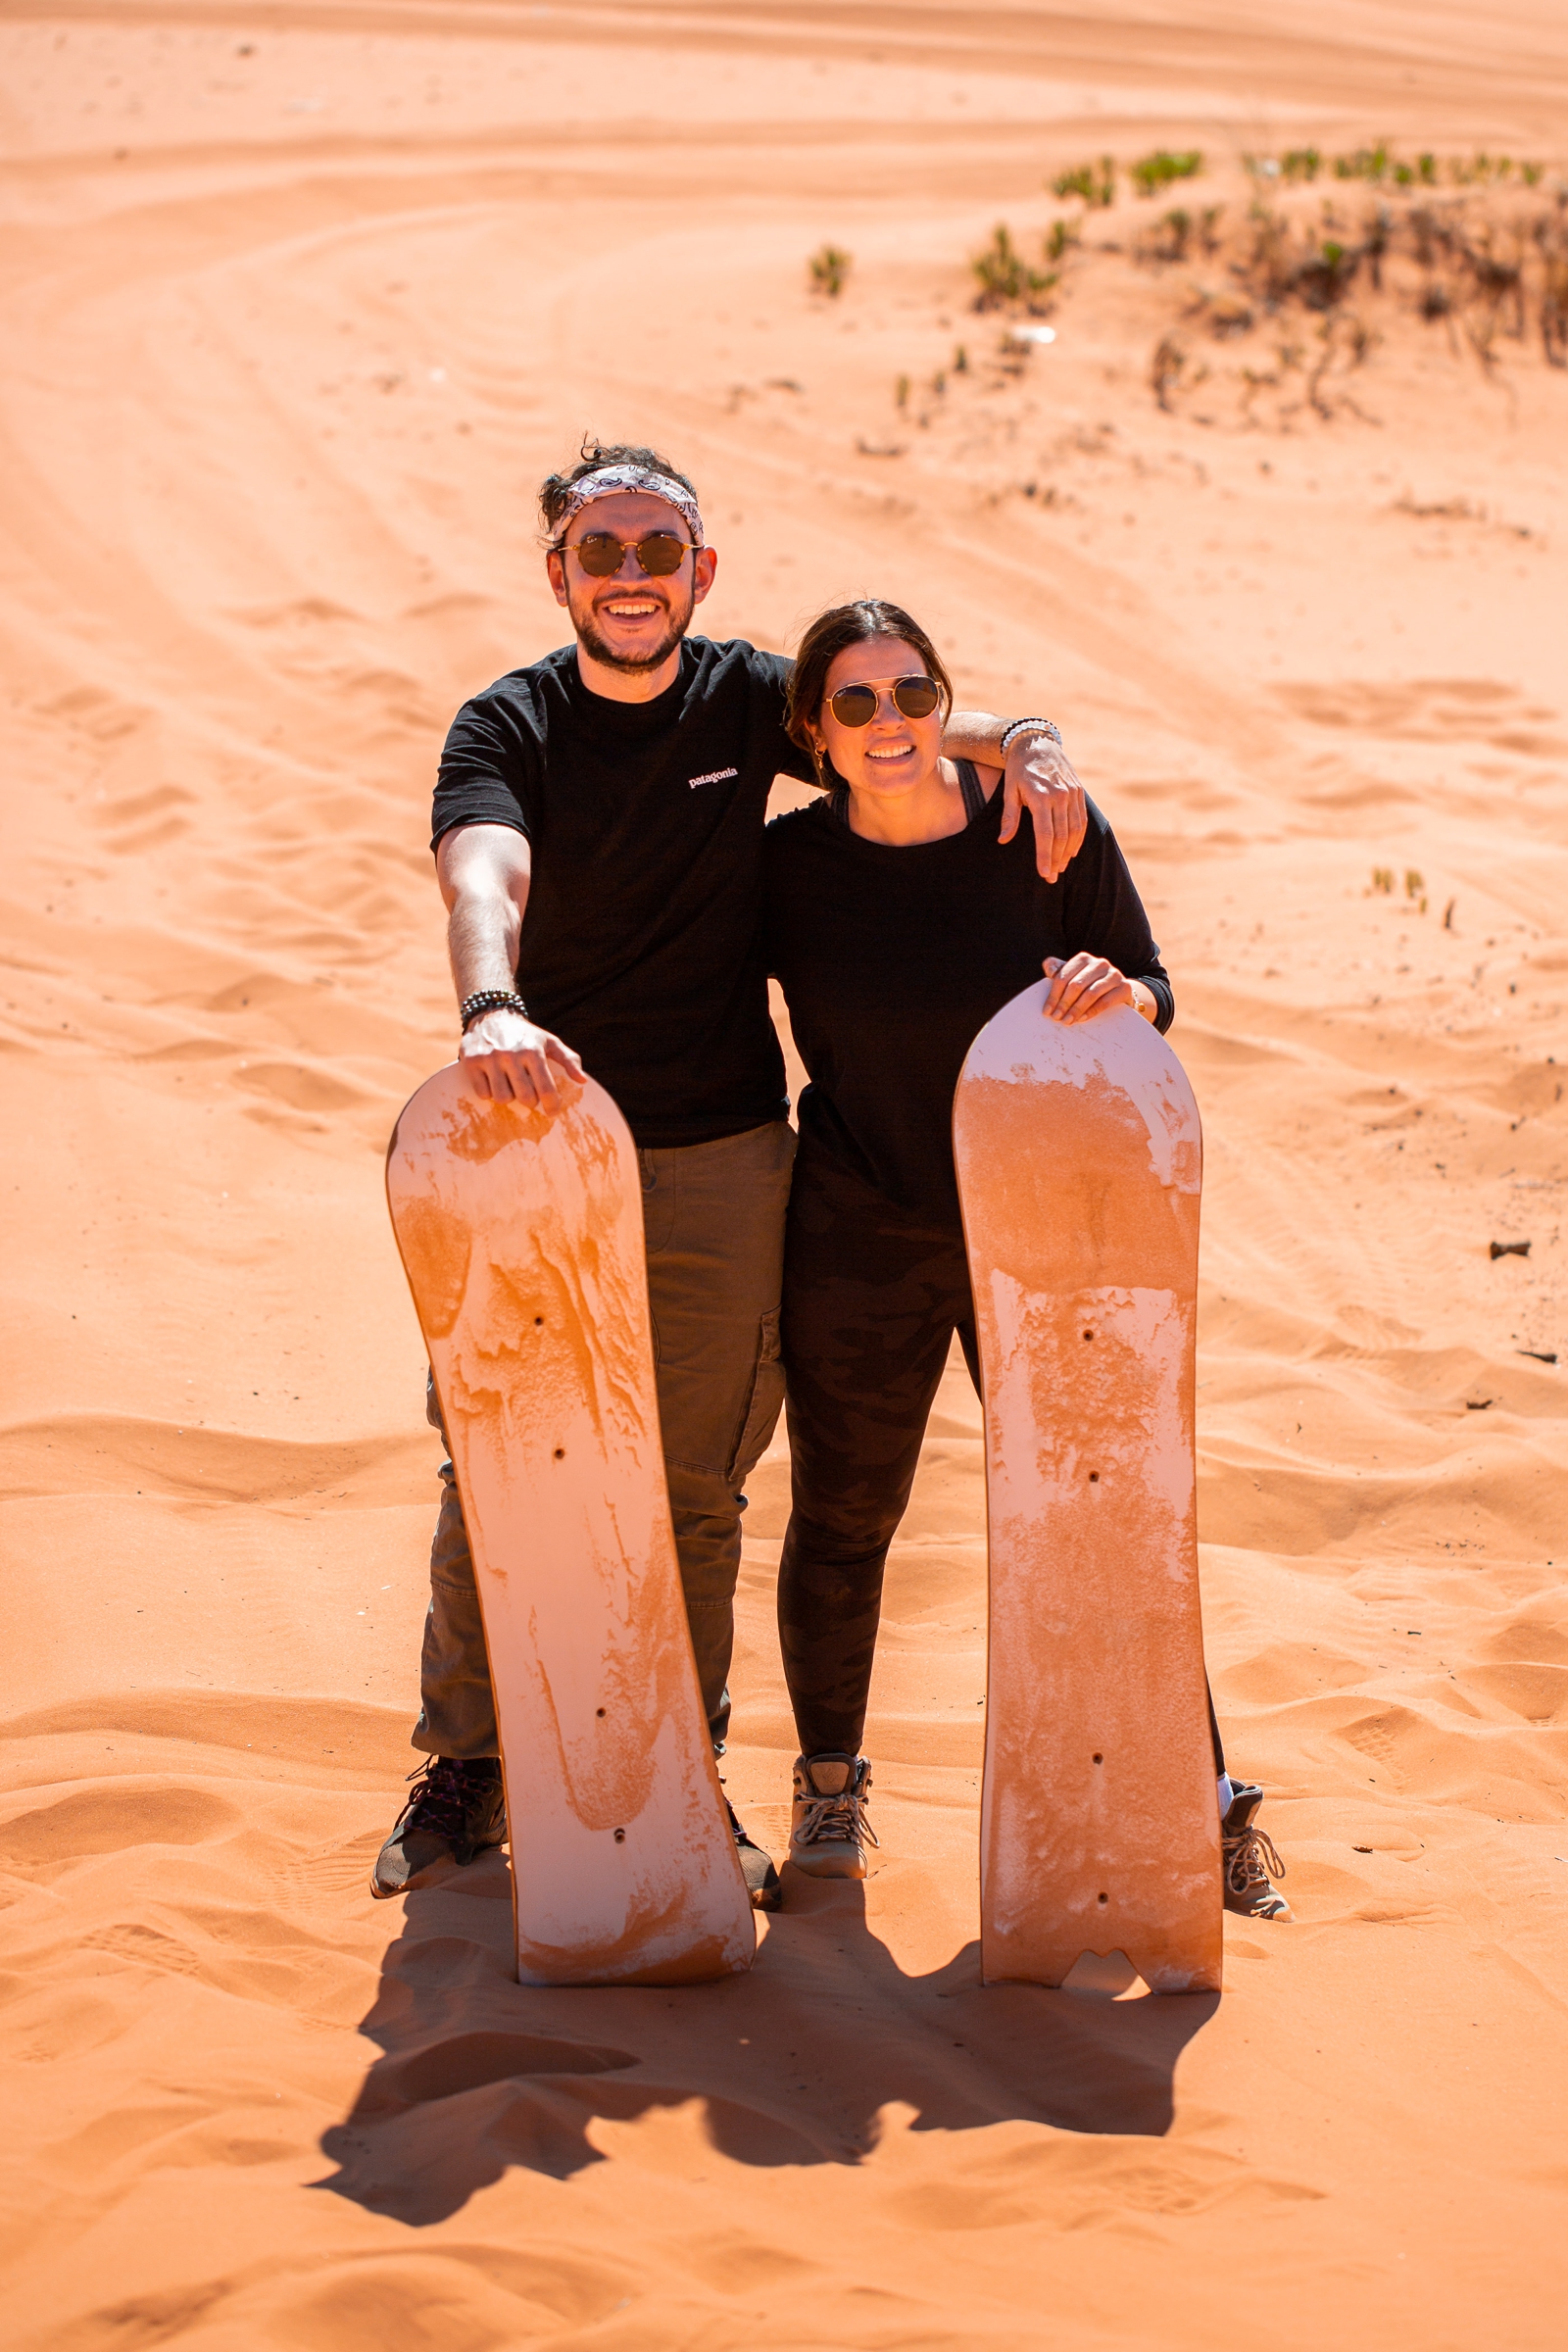 A newly engaged couple posing and smiling with their sandboards by the Utah slot canyons